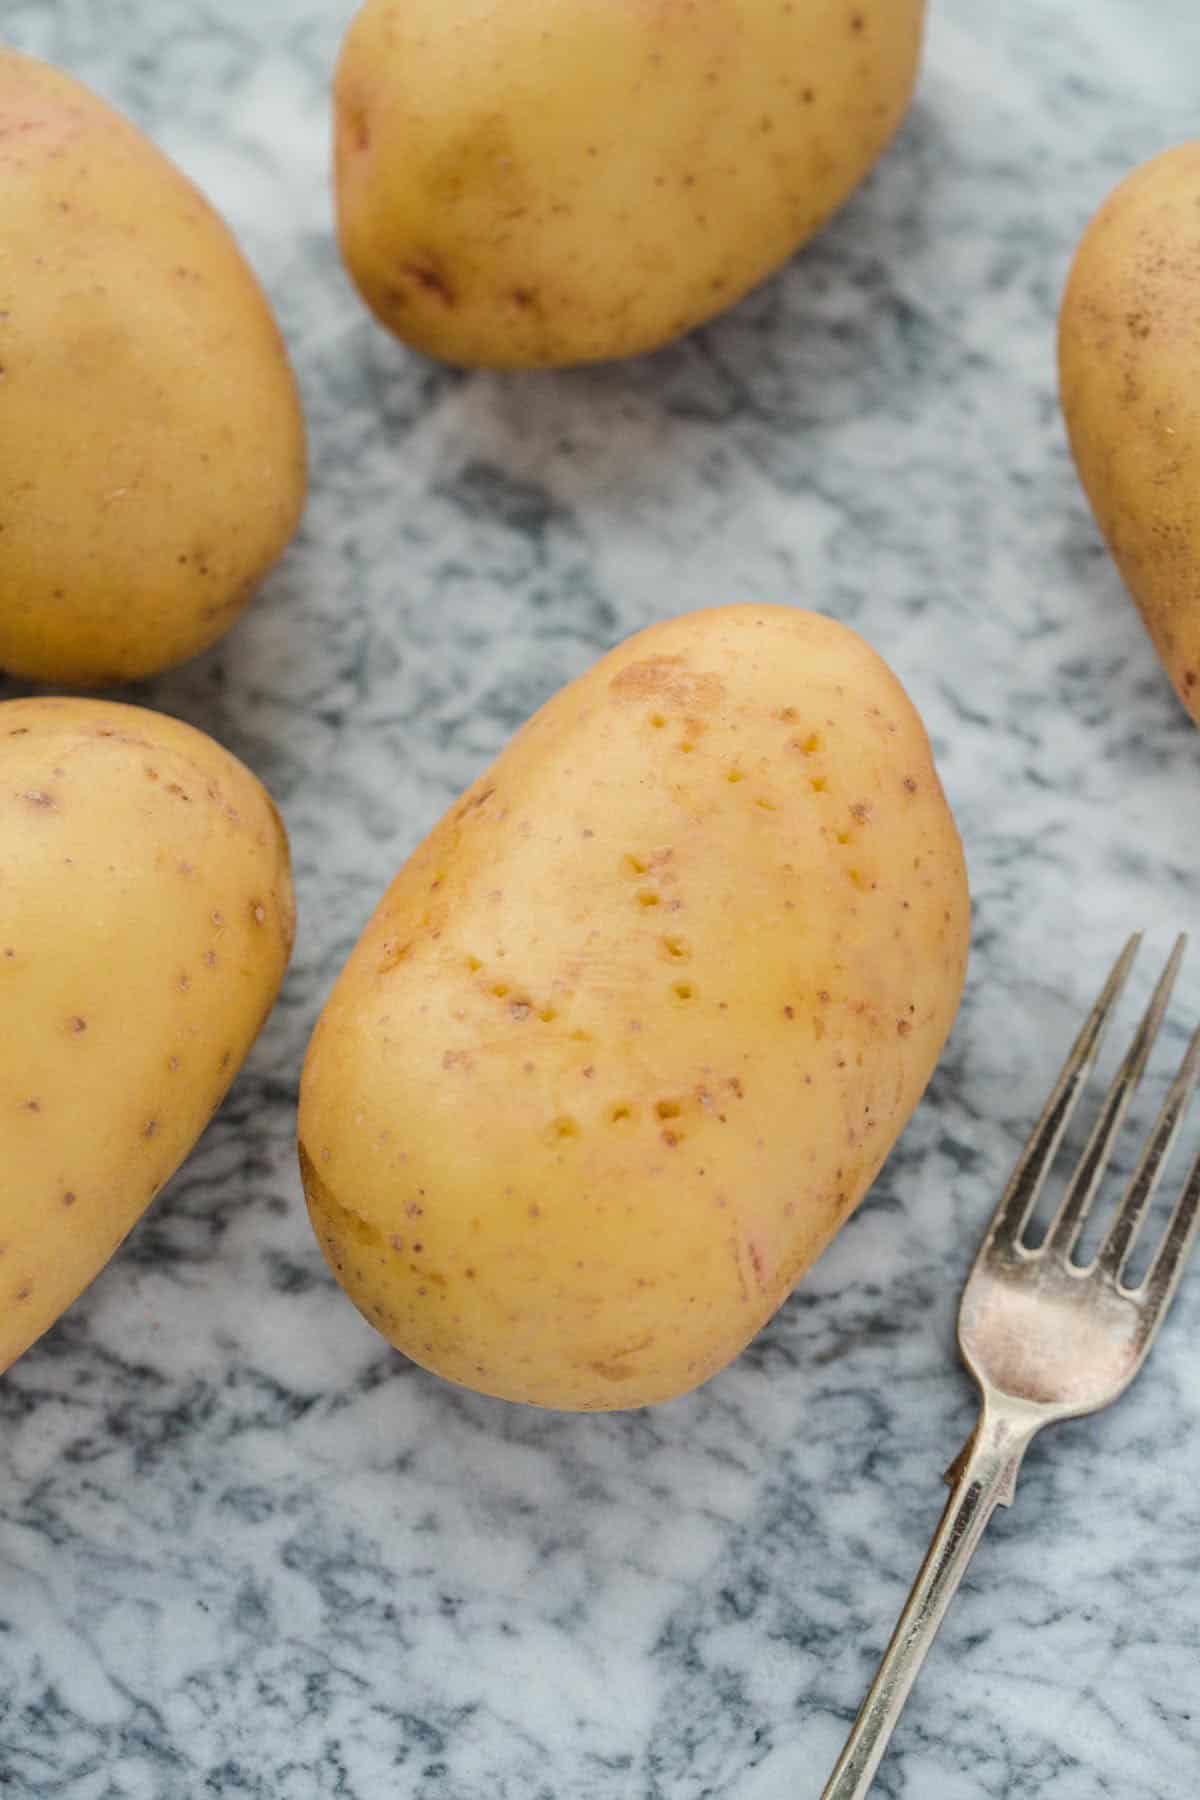 Potatoes pricked with a fork 